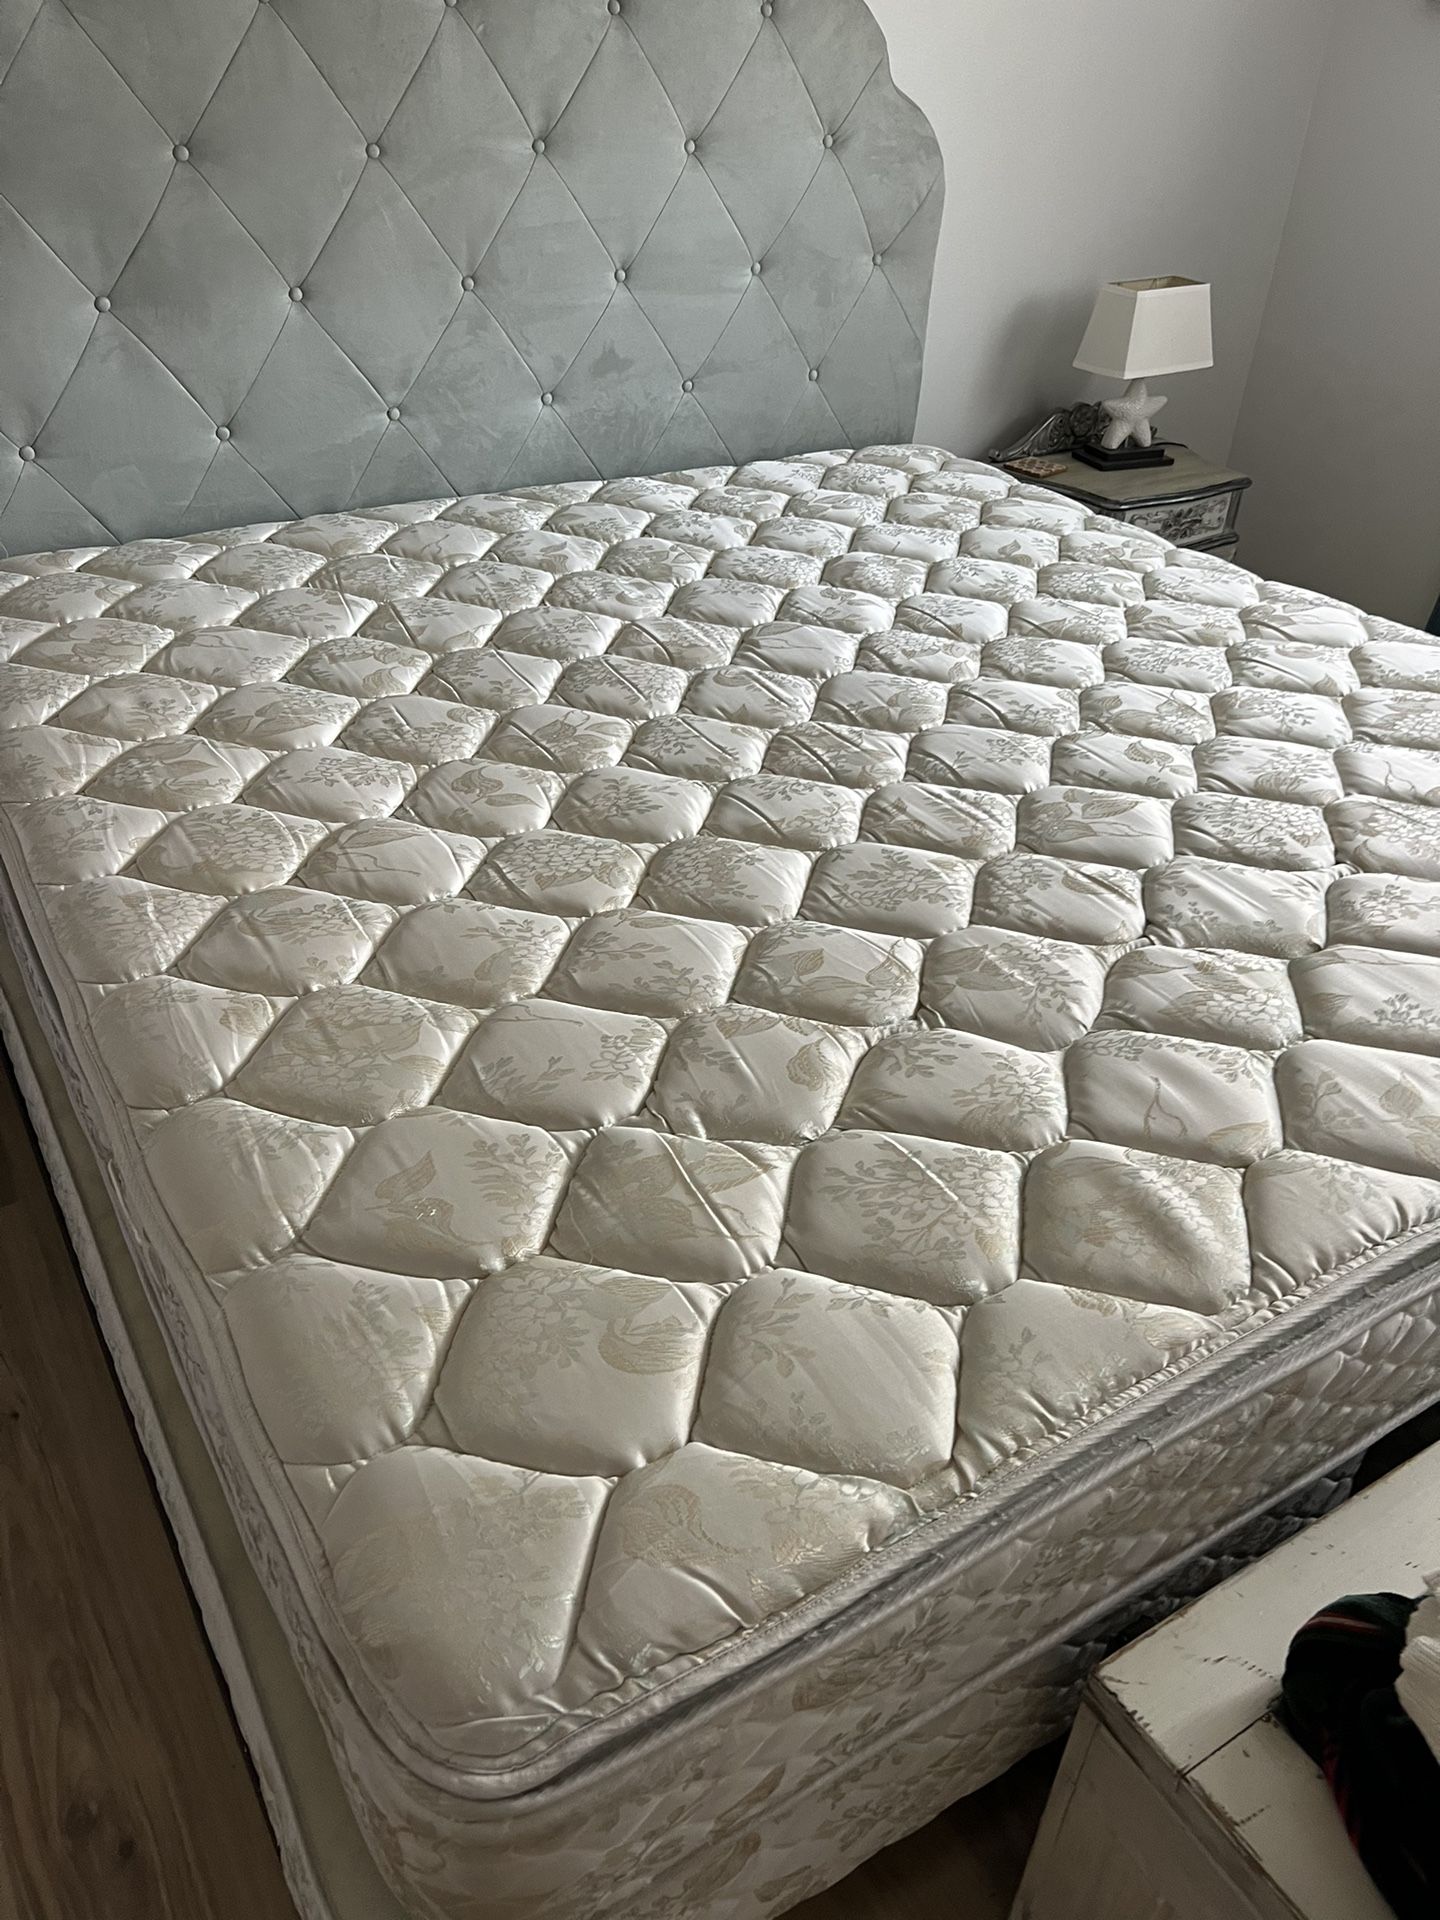 King Mattress, white frame and wood slats—HEADBOARD NOT INCLUDED